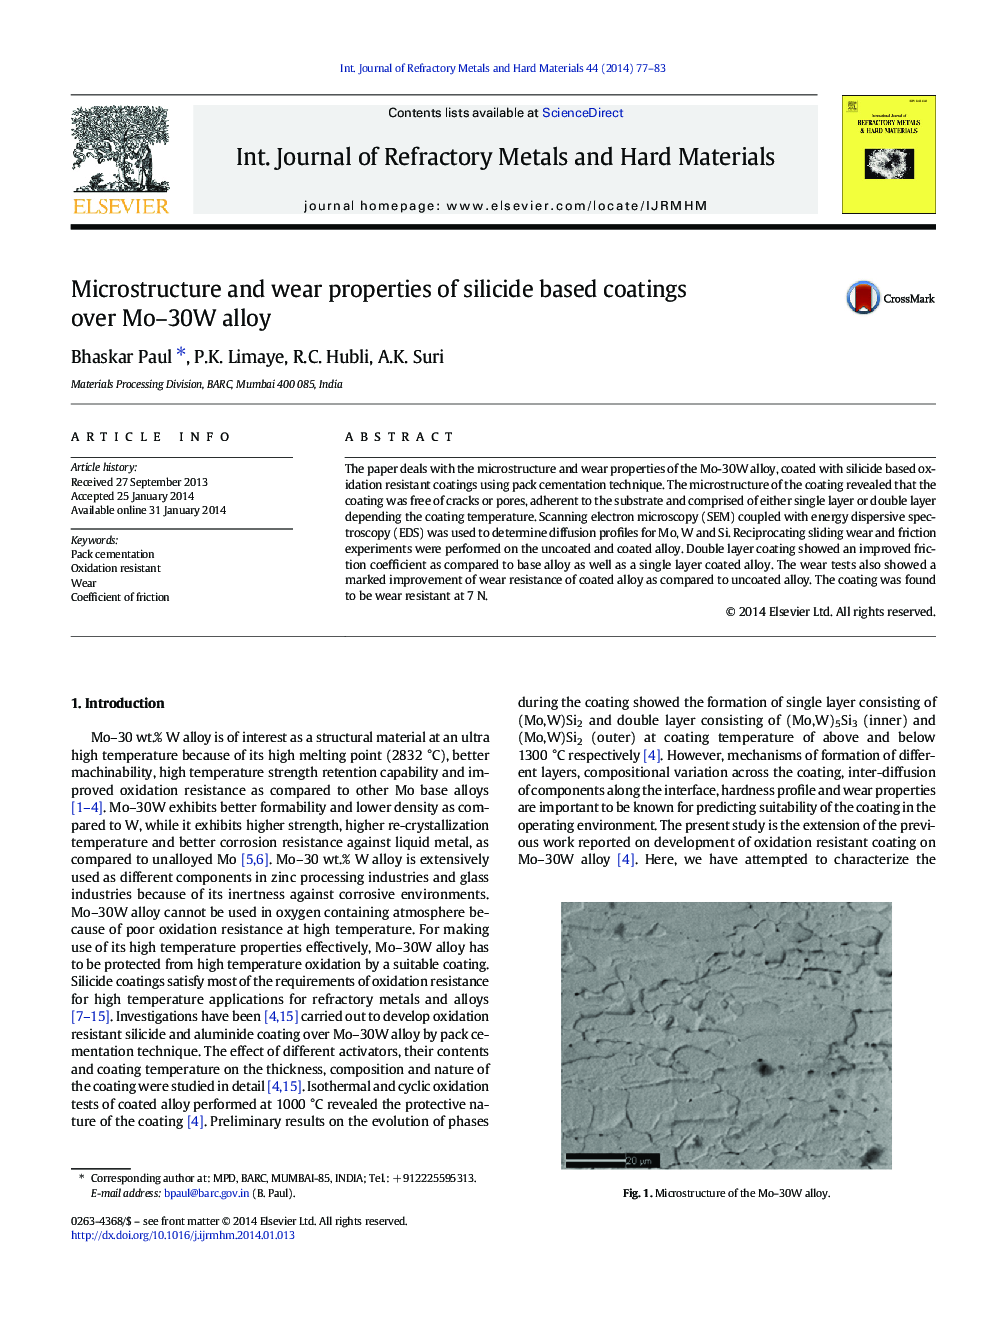 Microstructure and wear properties of silicide based coatings over Mo–30W alloy